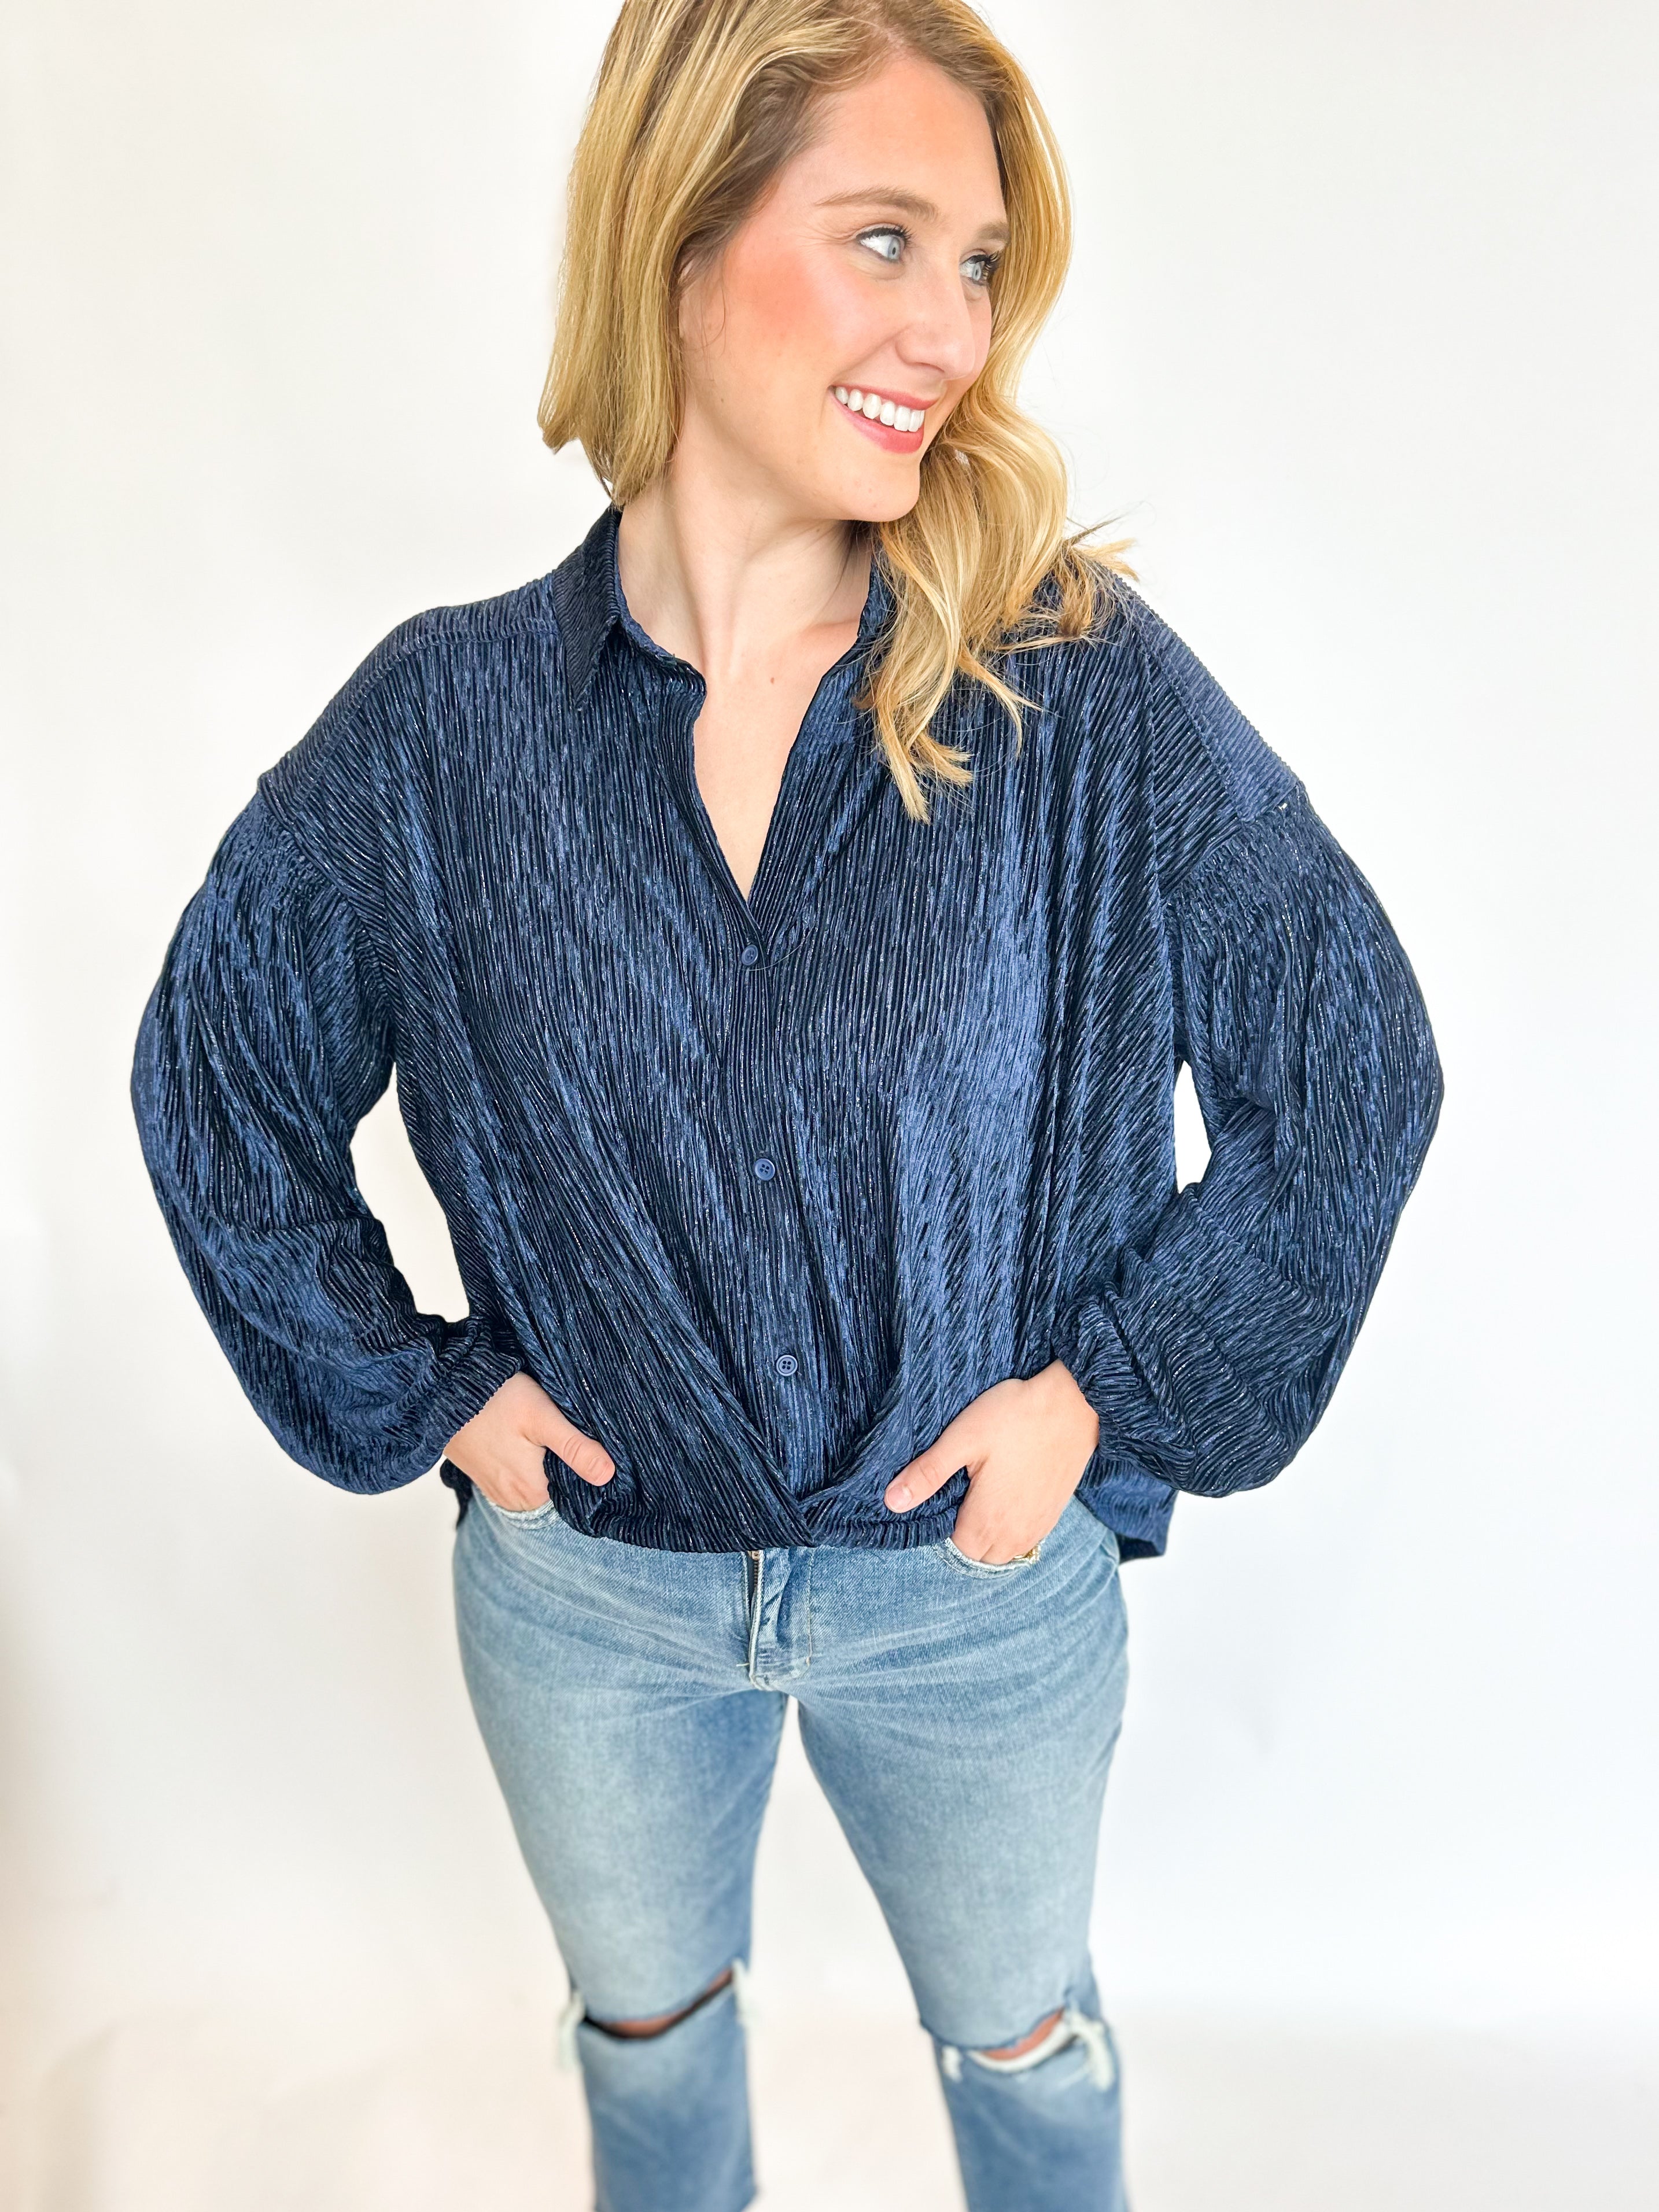 Textured Velvet Blouse - Navy-200 Fashion Blouses-SKIES ARE BLUE-July & June Women's Fashion Boutique Located in San Antonio, Texas